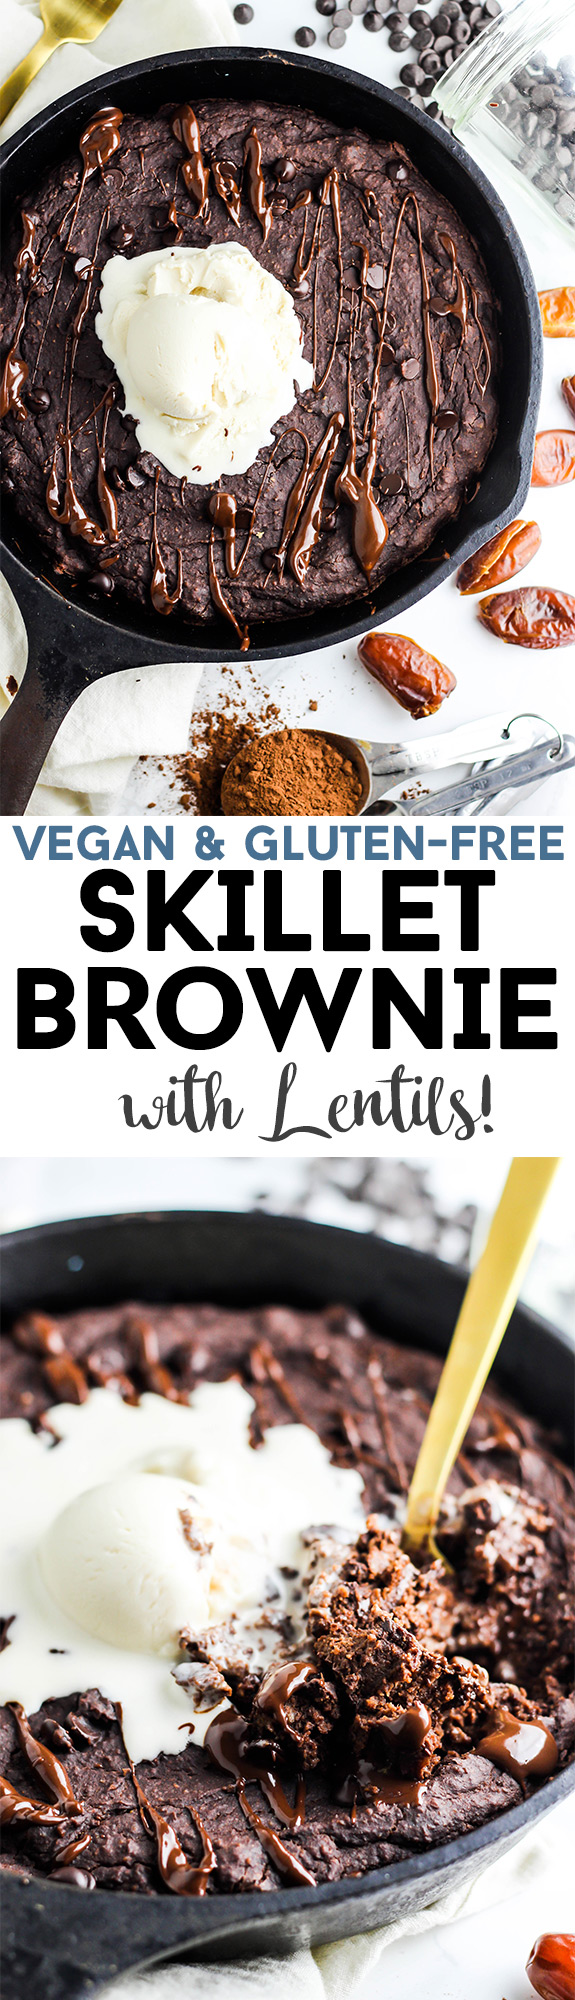 No one will guess that lentils are hiding in this Vegan Skillet Brownie! It's rich, fudgy, and perfect with a scoop of vegan ice cream. Gluten-free!